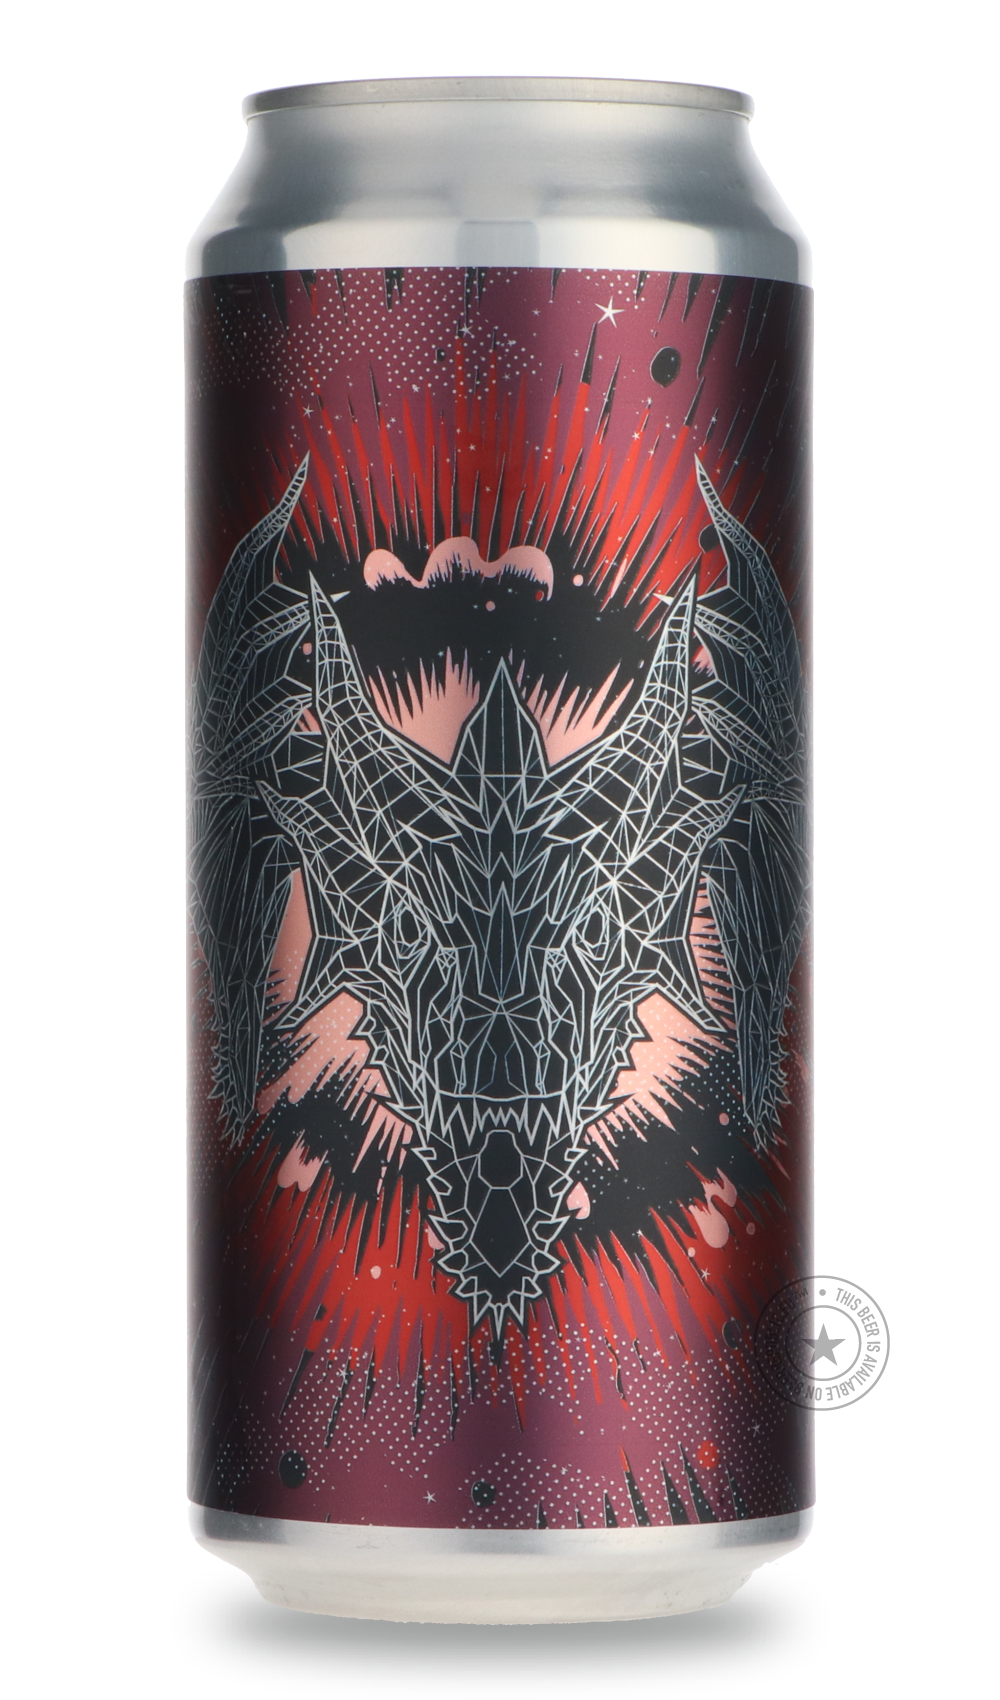 -Mortalis- Hydra | Jahmba Jelly Donut / Fourscore-Sour / Wild & Fruity- Only @ Beer Republic - The best online beer store for American & Canadian craft beer - Buy beer online from the USA and Canada - Bier online kopen - Amerikaans bier kopen - Craft beer store - Craft beer kopen - Amerikanisch bier kaufen - Bier online kaufen - Acheter biere online - IPA - Stout - Porter - New England IPA - Hazy IPA - Imperial Stout - Barrel Aged - Barrel Aged Imperial Stout - Brown - Dark beer - Blond - Blonde - Pilsner -